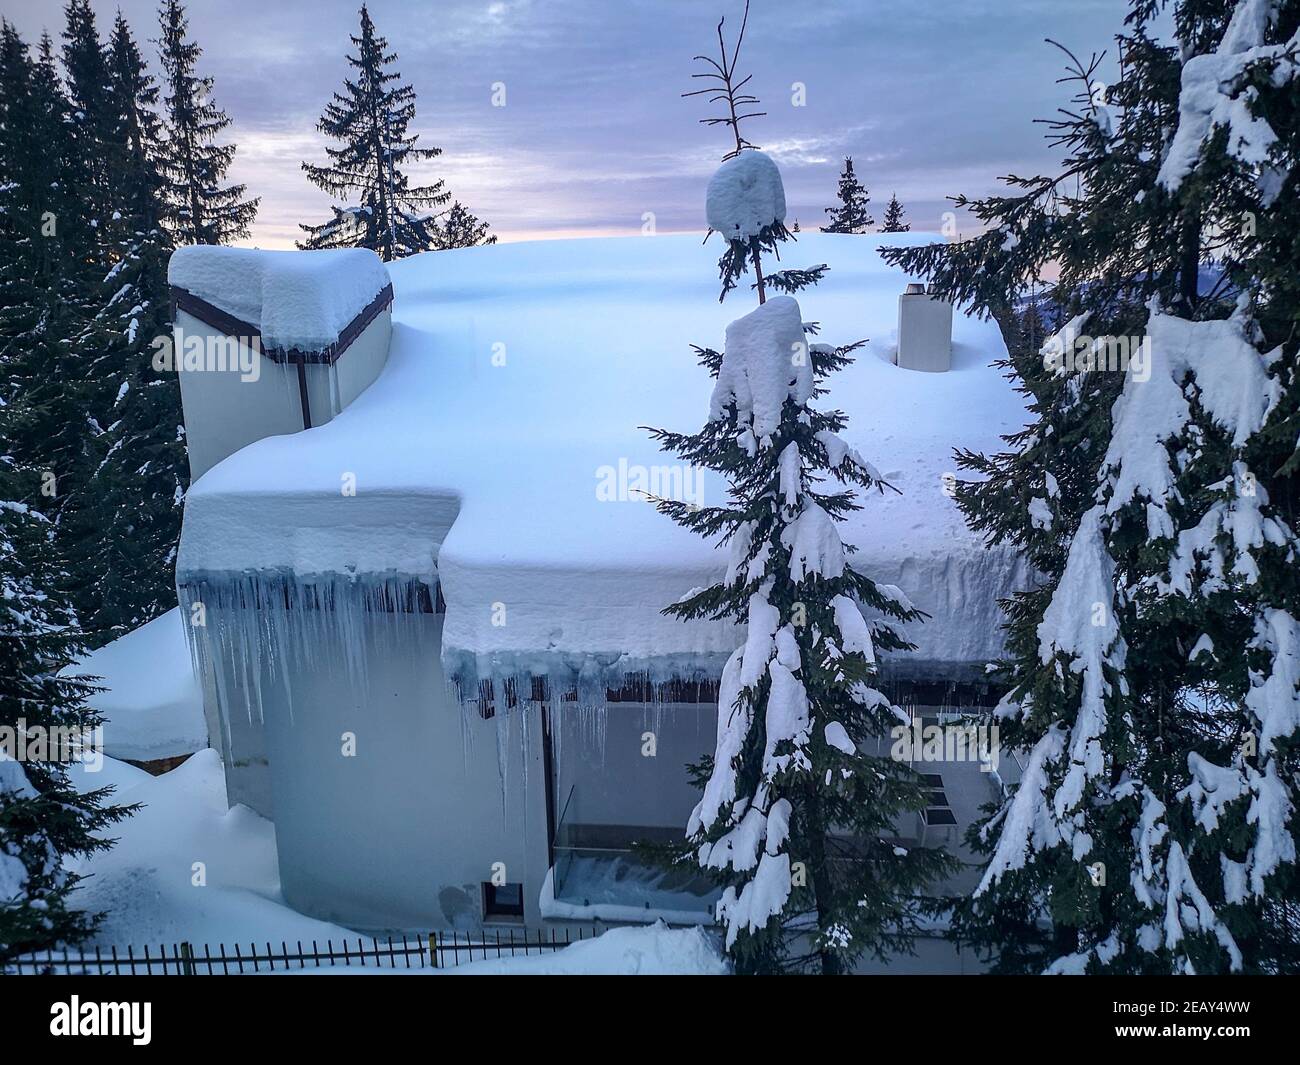 Small modern lodge or cabana covered in snow, surrounded by icy evergreens overlooking the Carpathian Mountains, winter landscape in Ranca, Romania Stock Photo